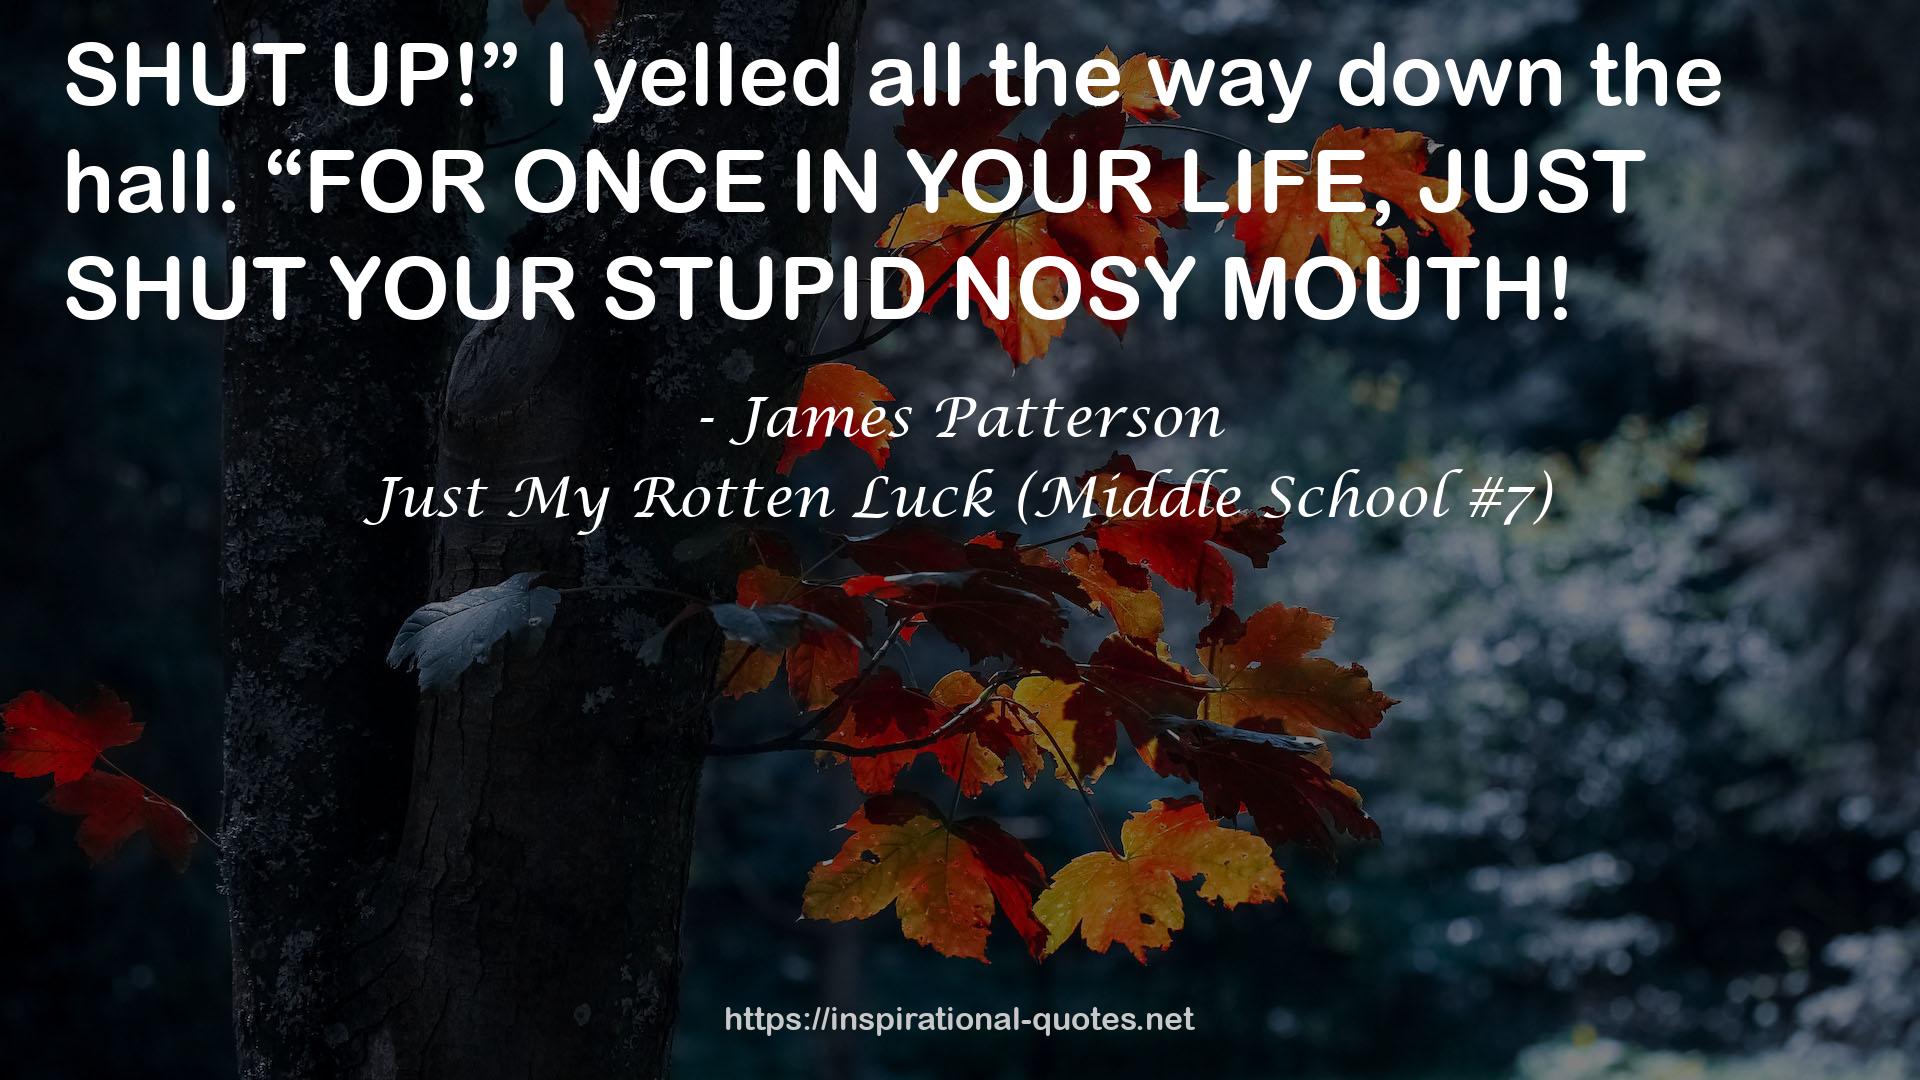 Just My Rotten Luck (Middle School #7) QUOTES